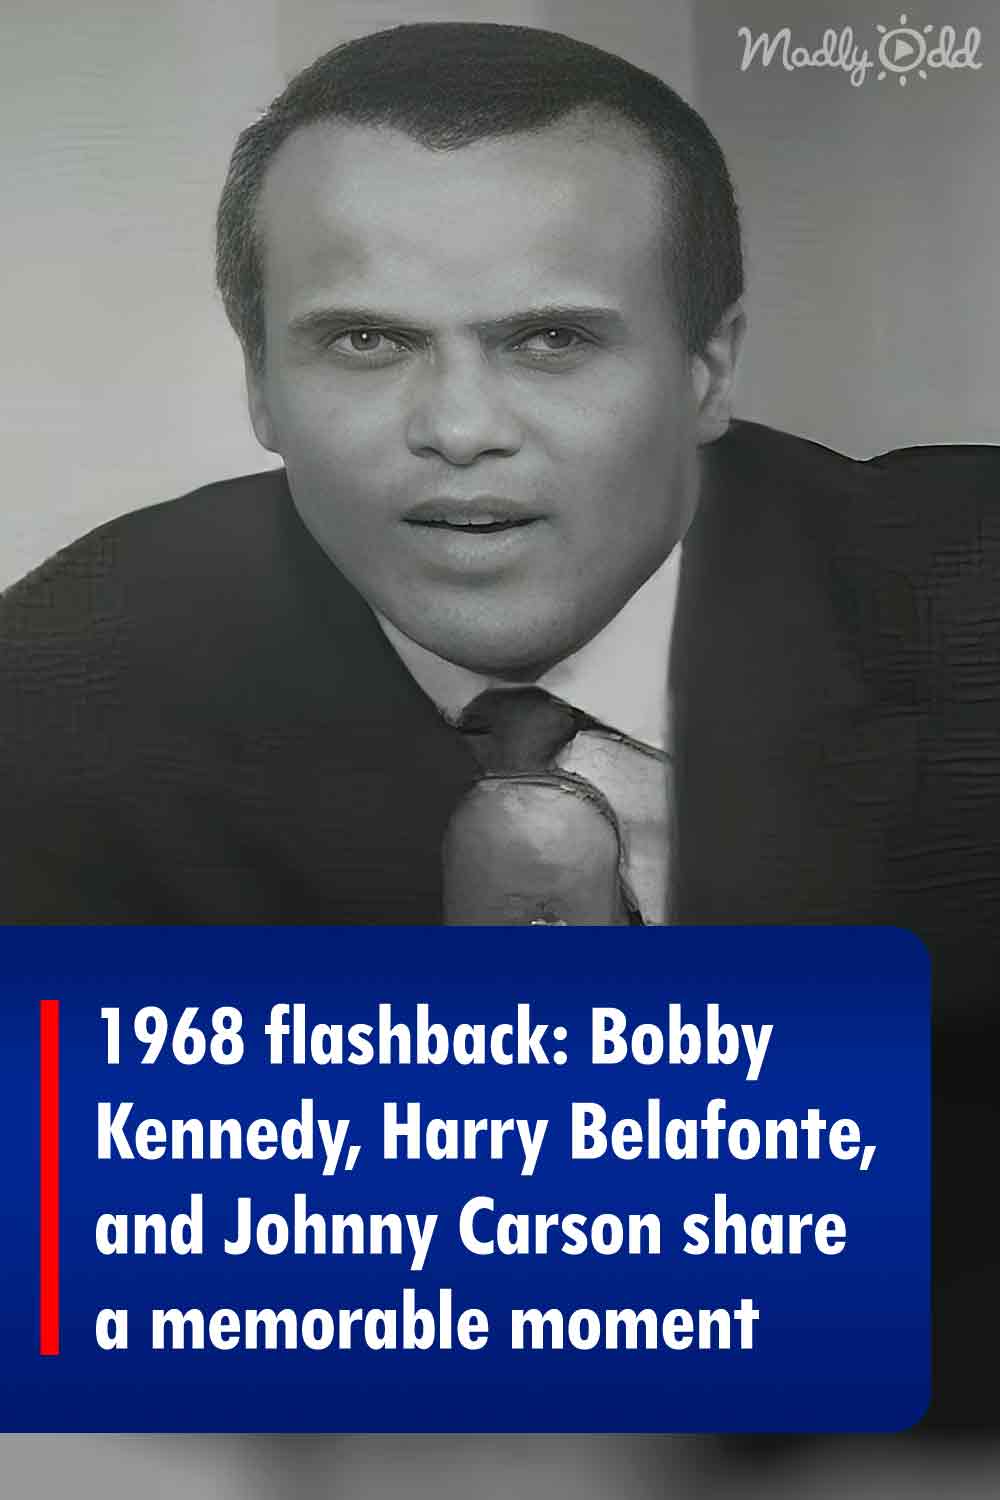 1968 flashback: Bobby Kennedy, Harry Belafonte, and Johnny Carson share a memorable moment